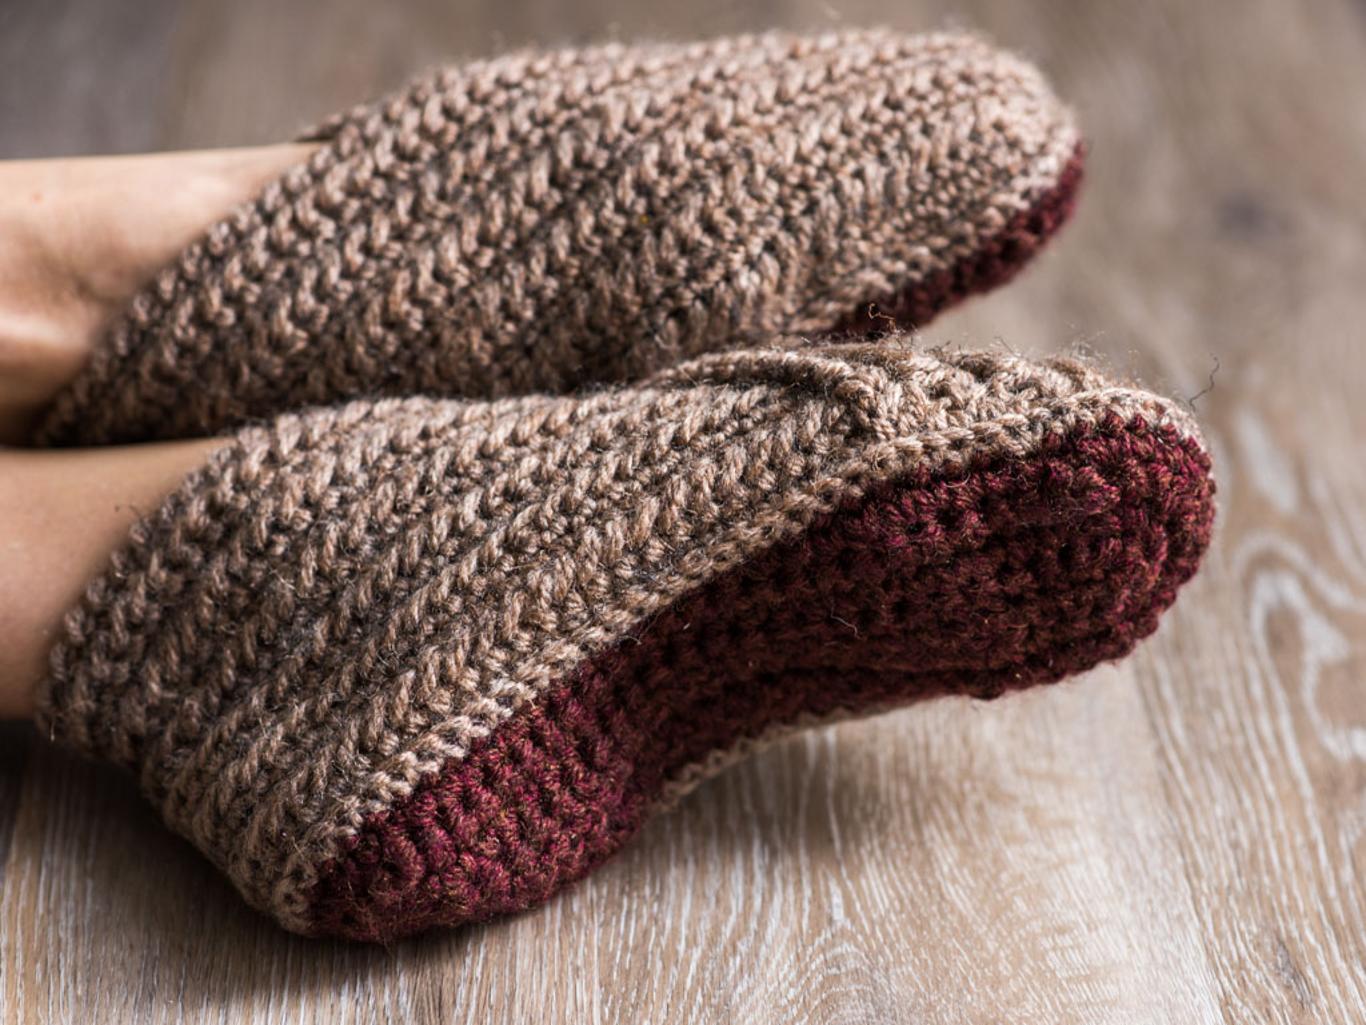 wrap slippers